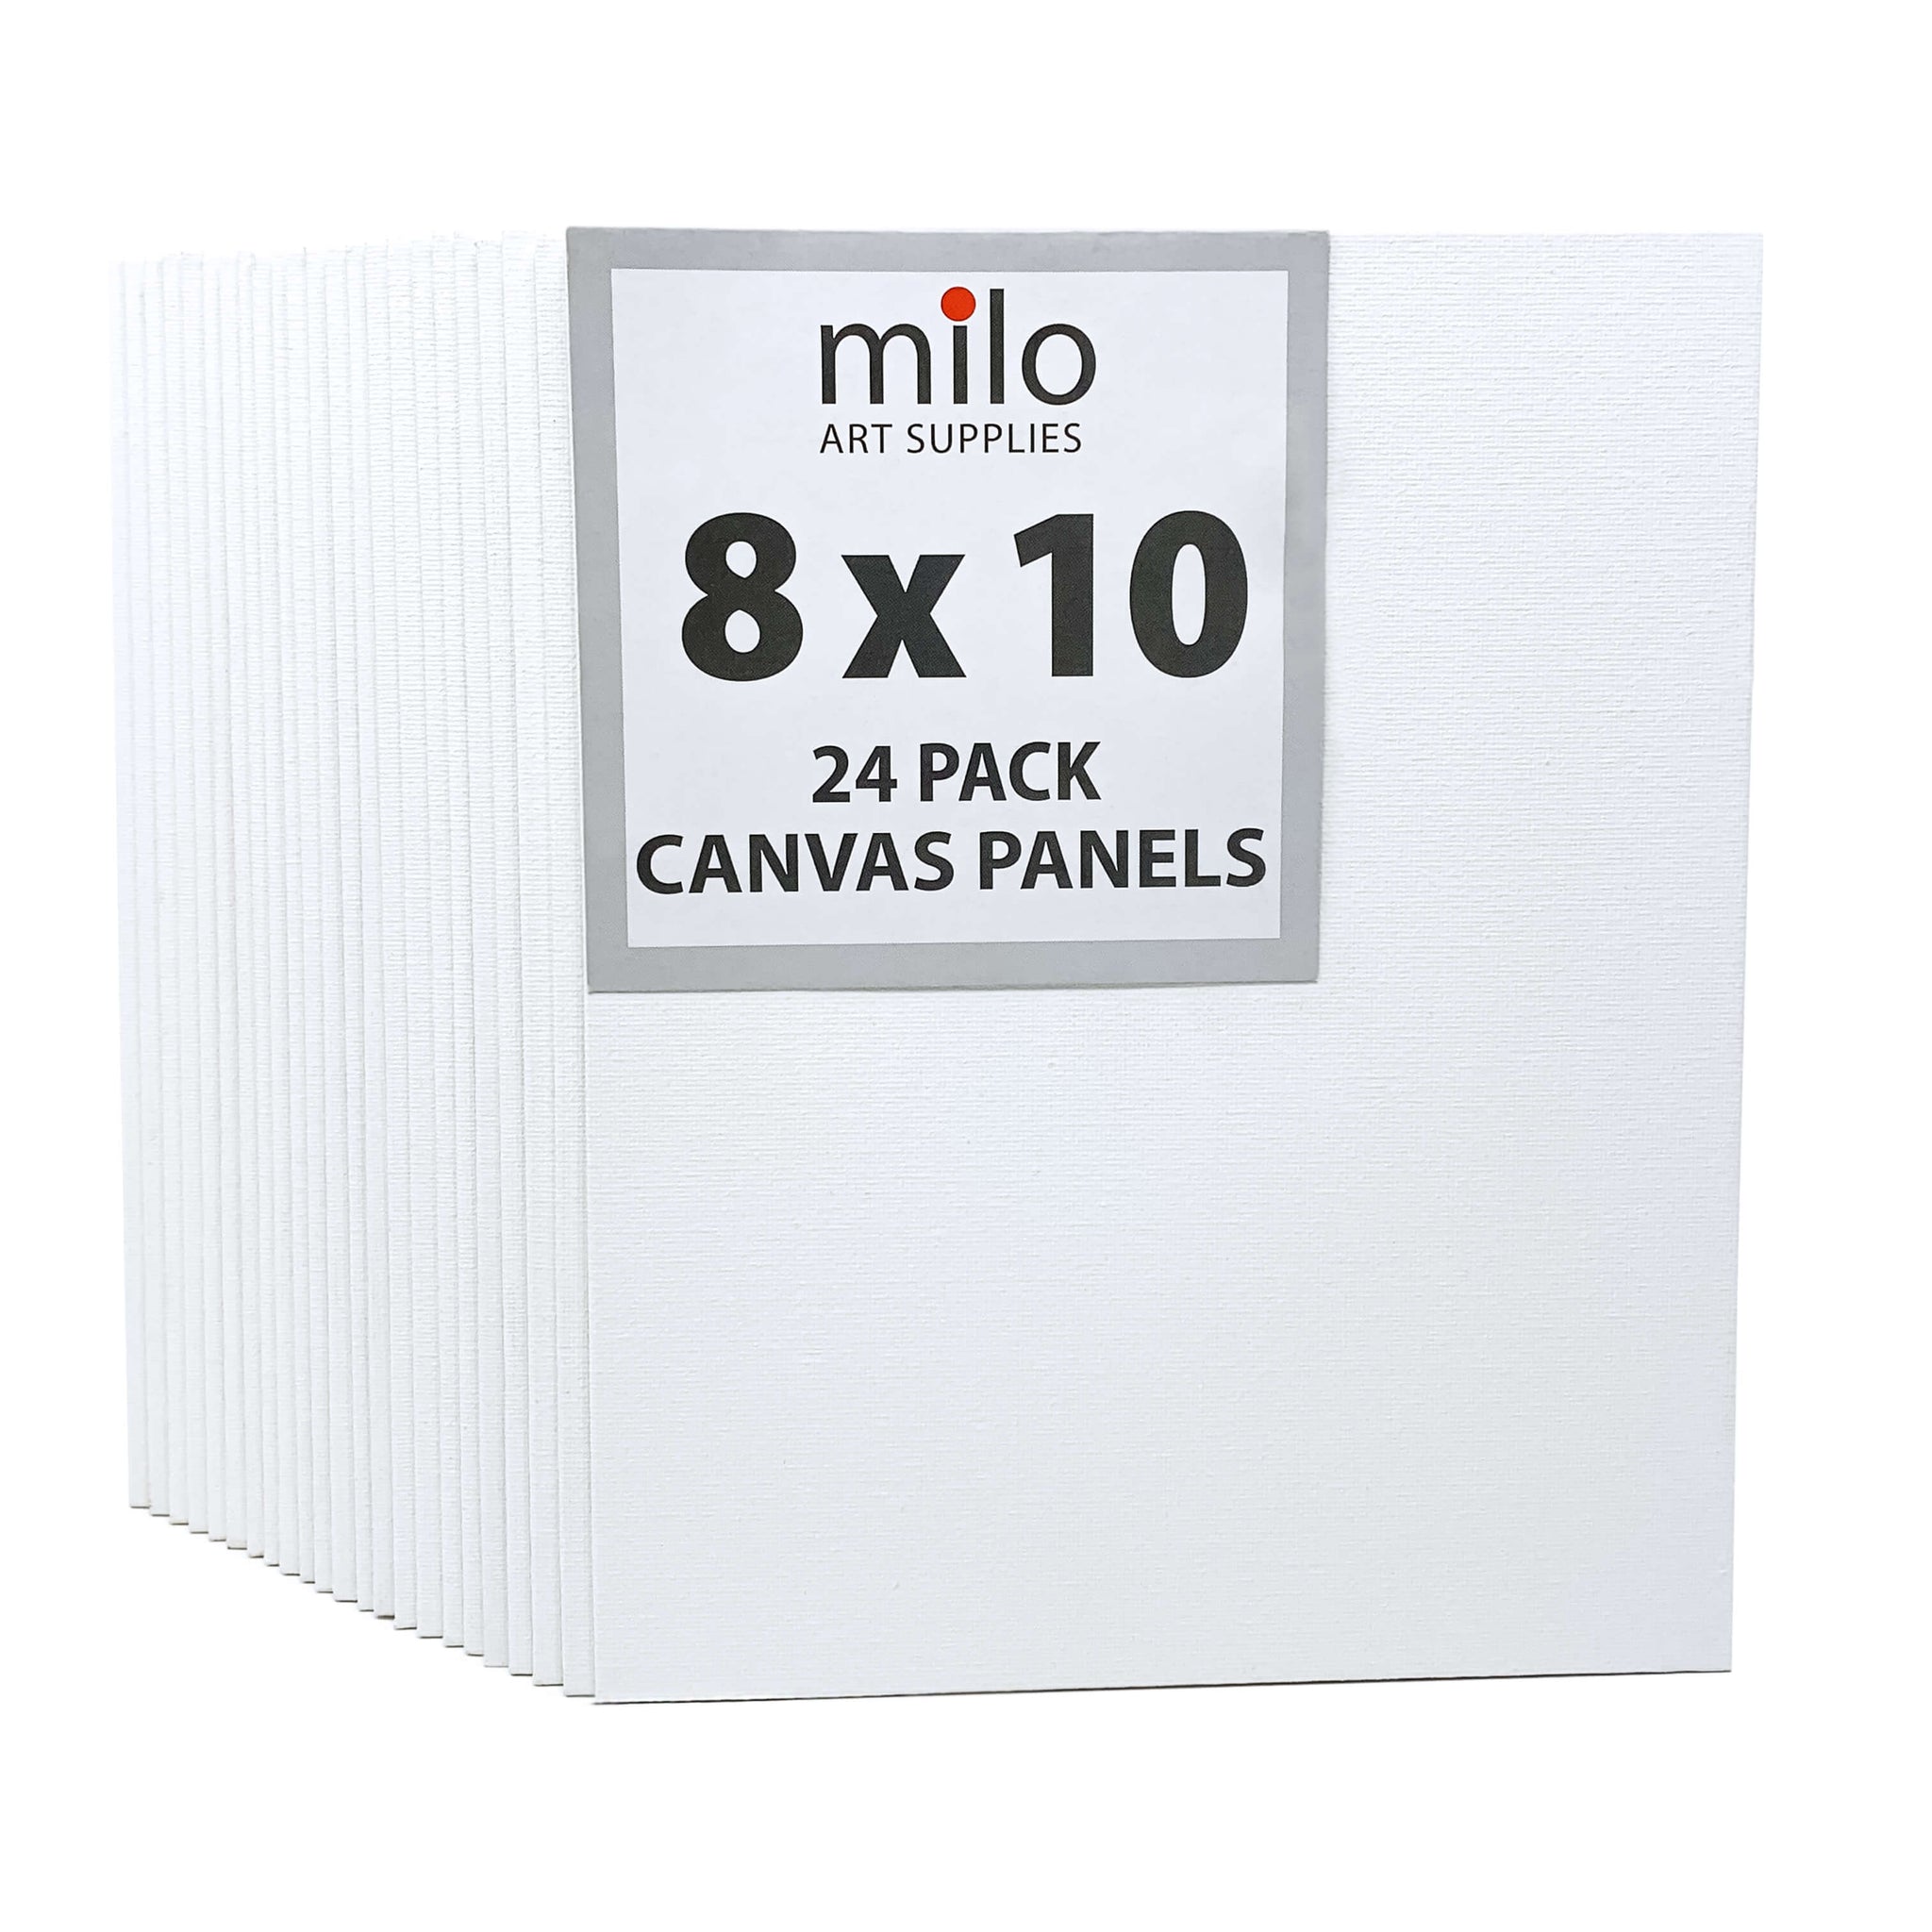 20 Pack Canvases for Painting with 8x10, Painting Canvas for Oil & Acrylic  Paint.